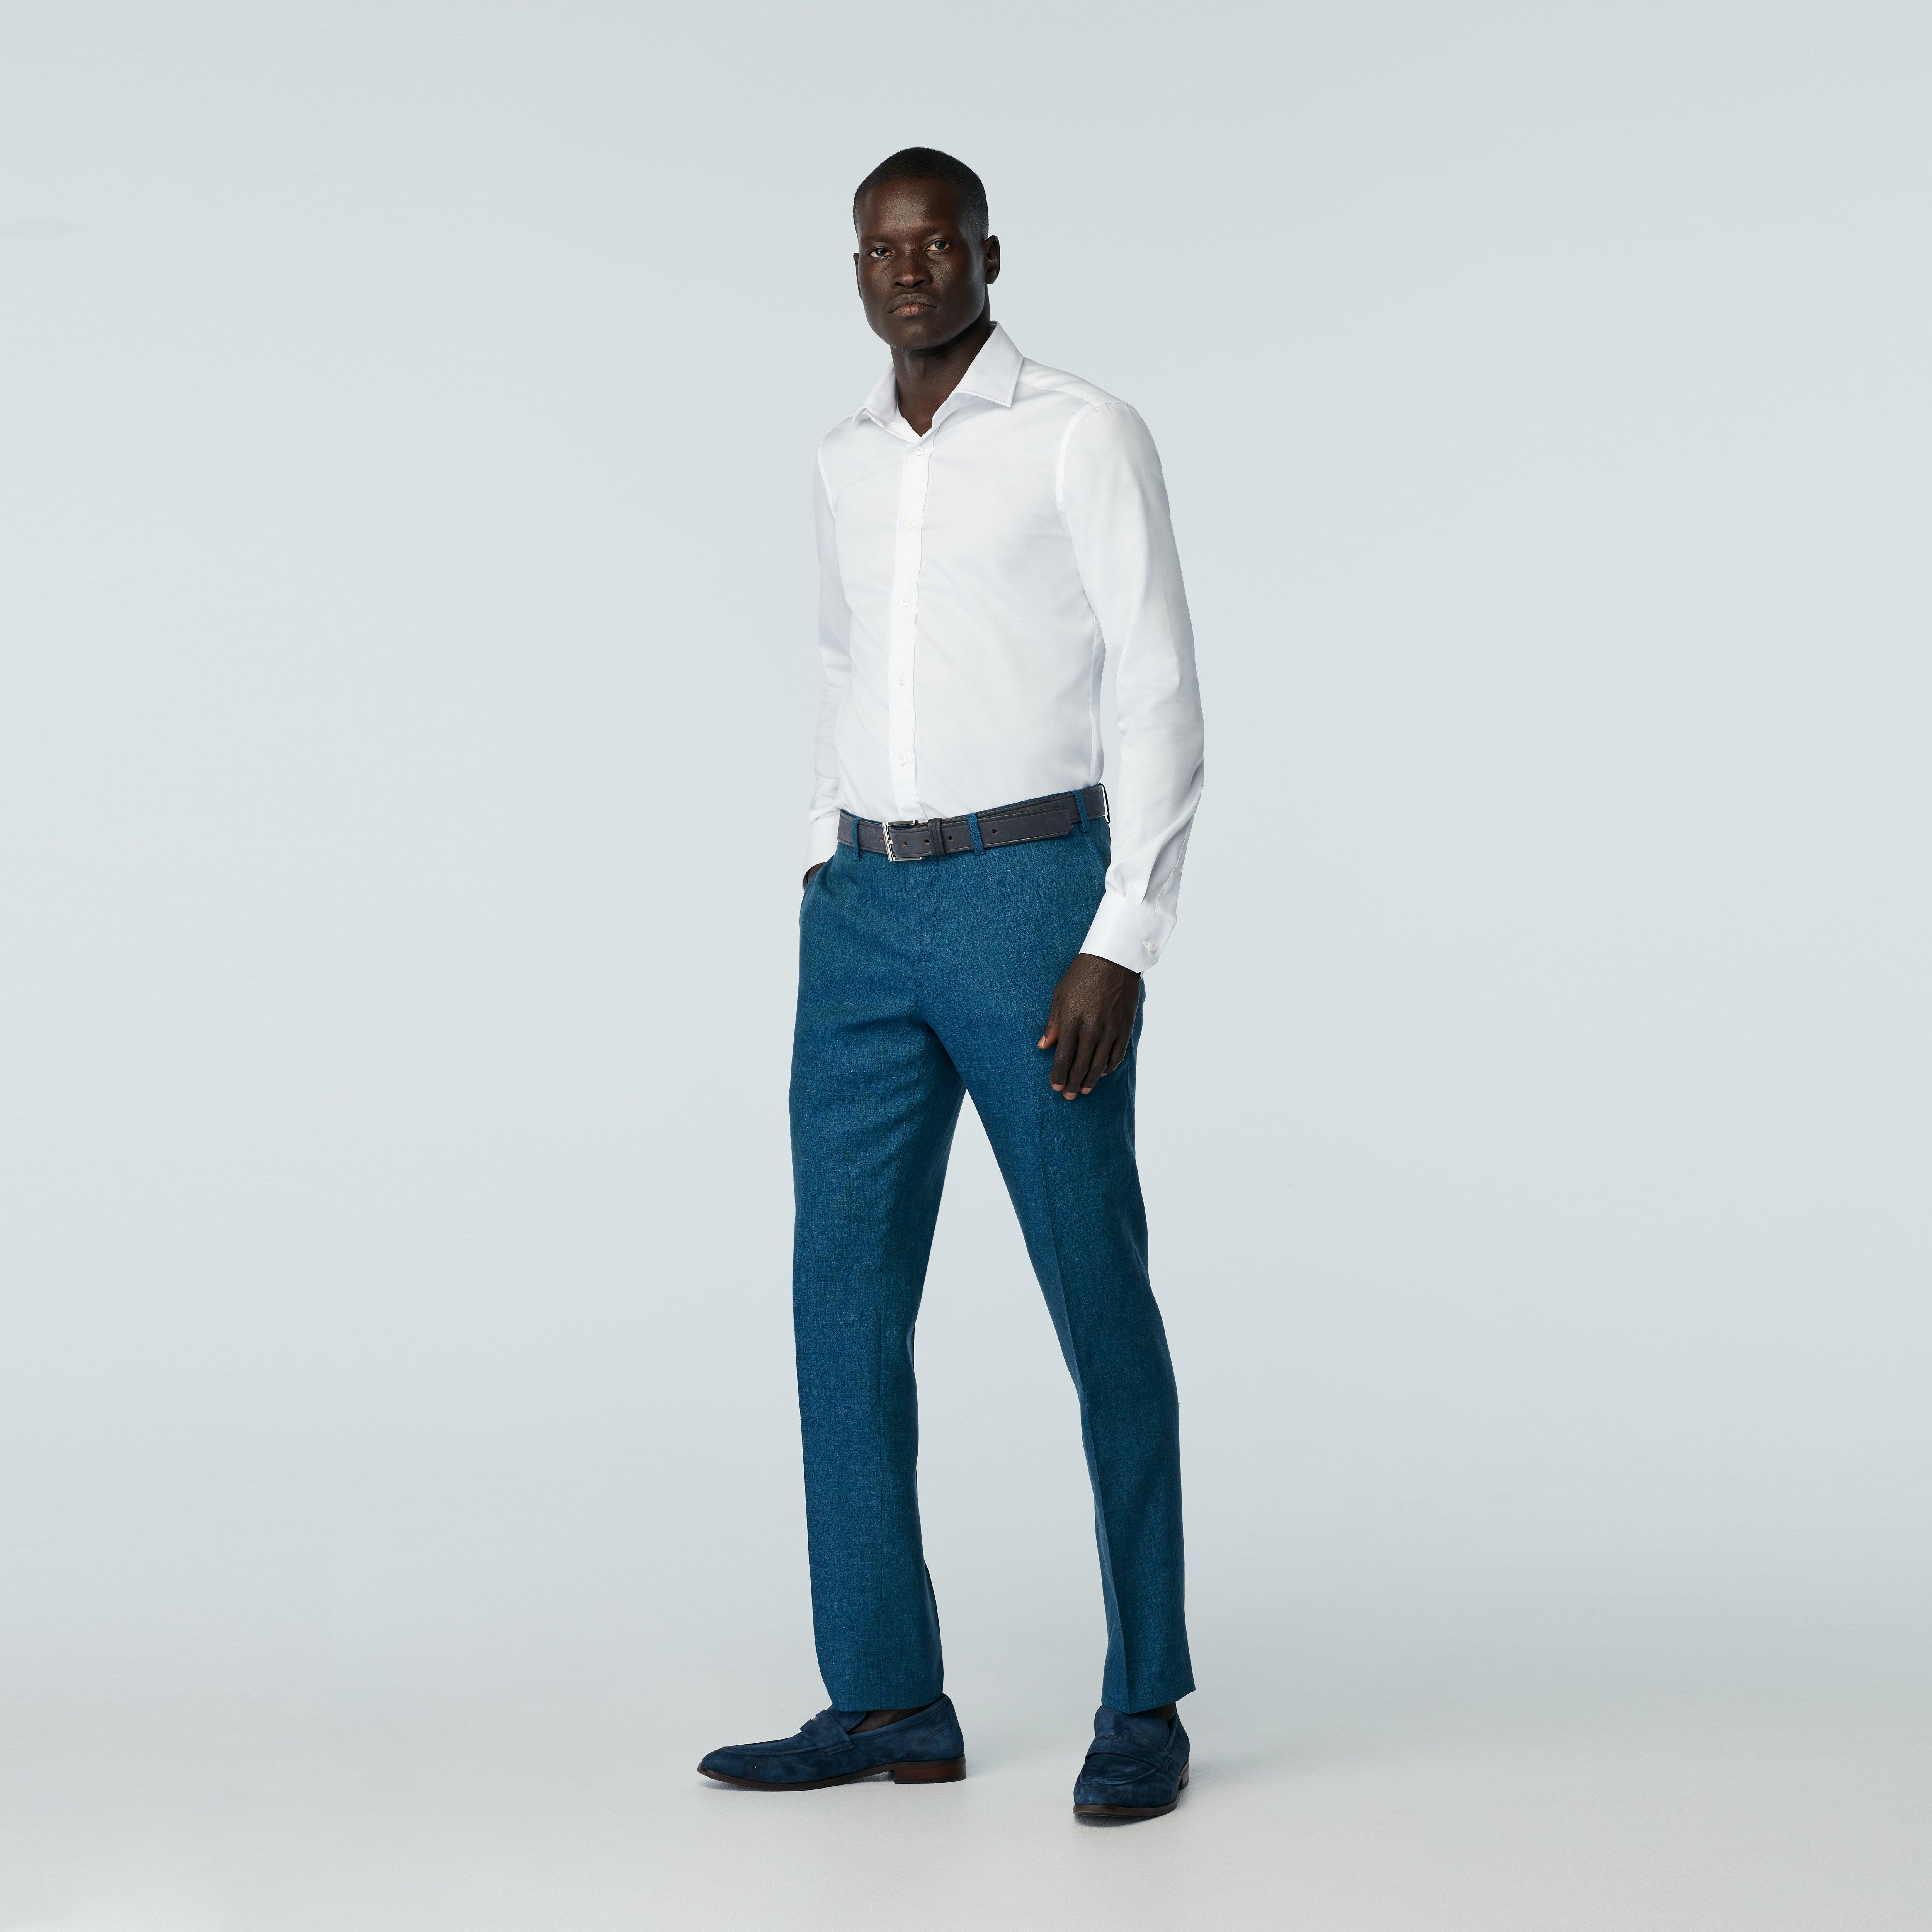 Custom Suits Made For You - Madesimo Linen Teal Suit | INDOCHINO